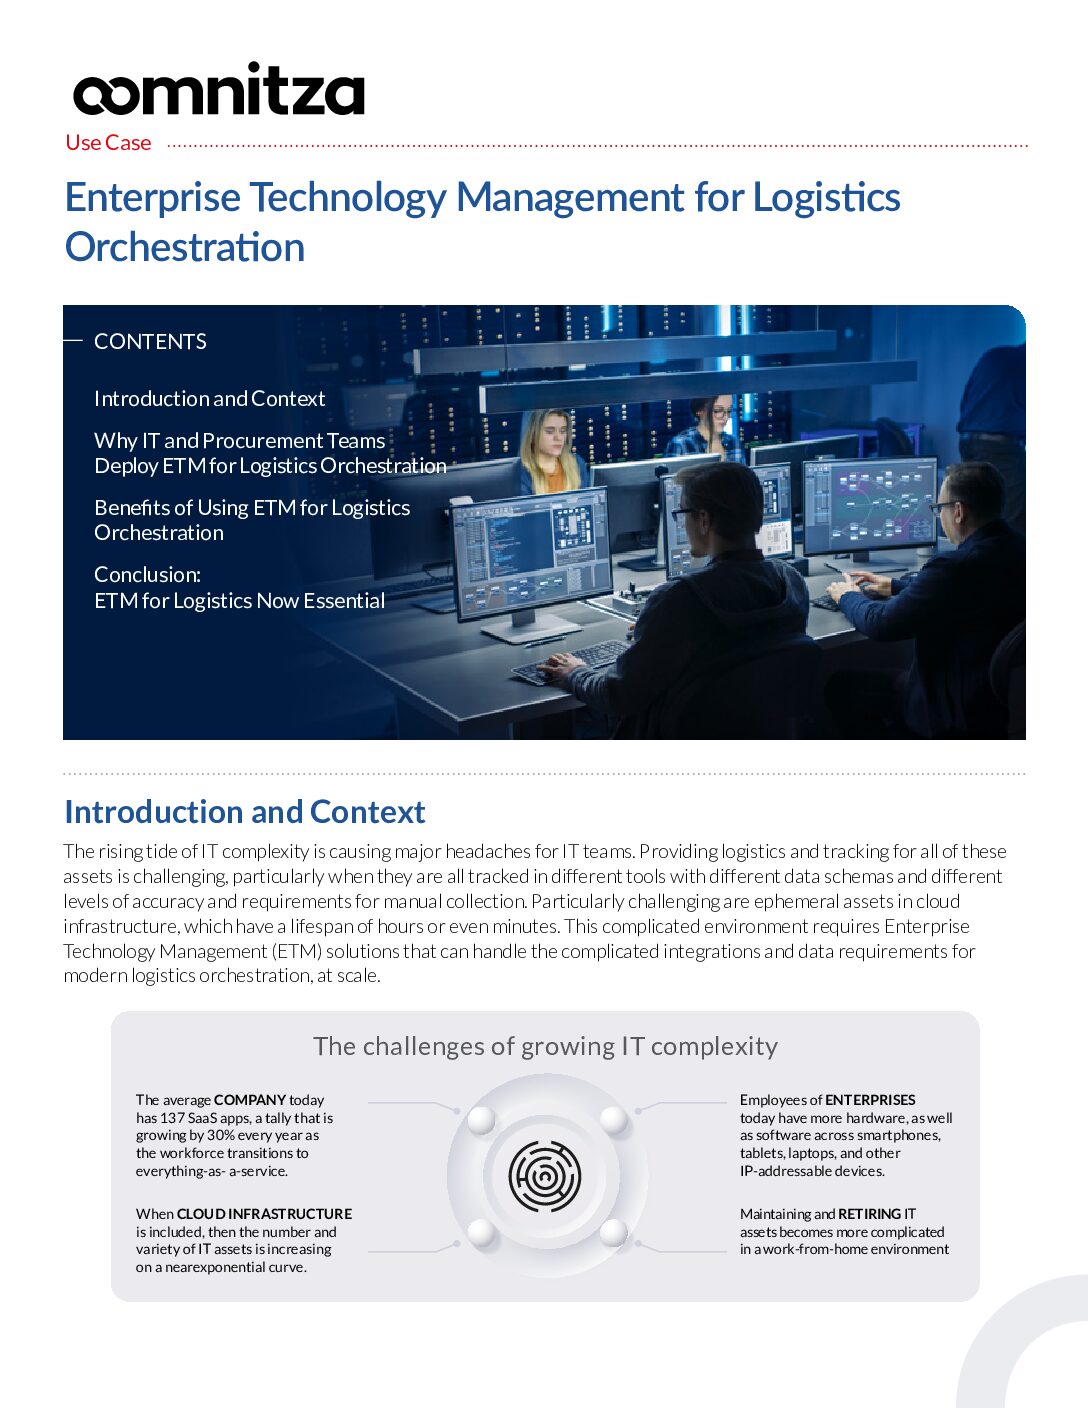 Featured image for Enterprise Technology Management for Logistics Orchestration Use Case